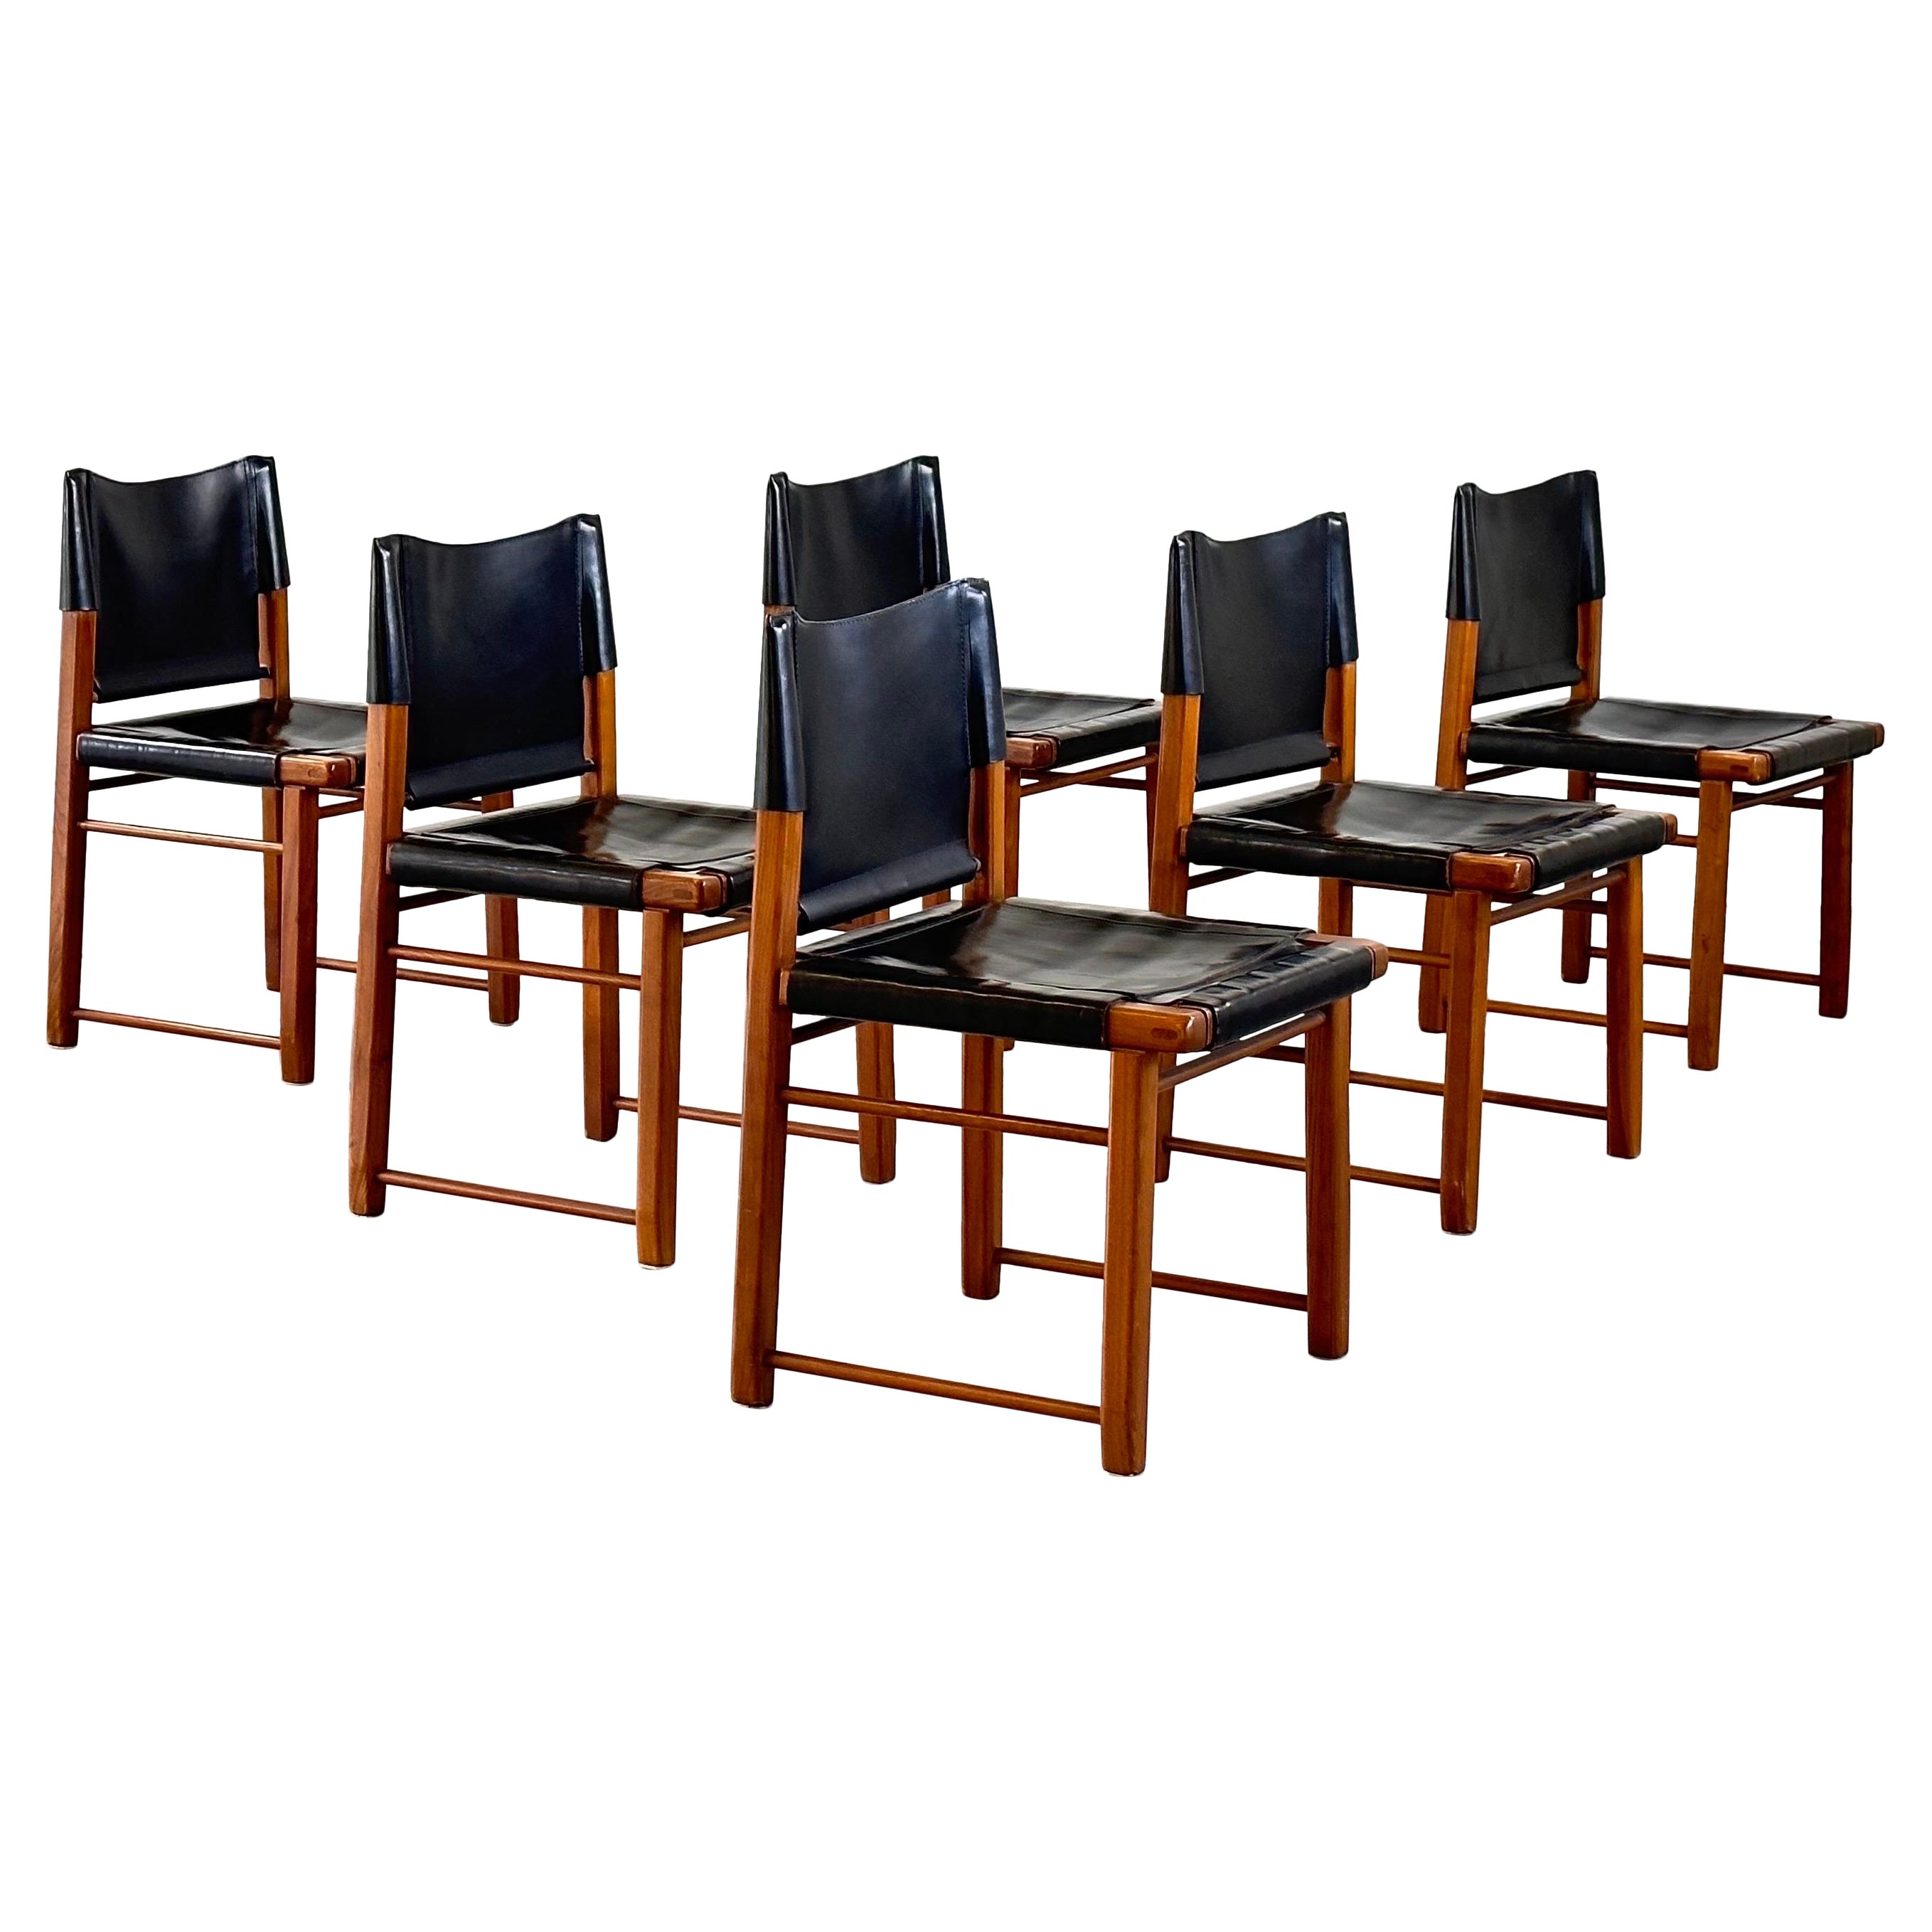 Chic Italian Elegance: Set of Six Walnut and Black Leather Dining Chairs, 1970s For Sale